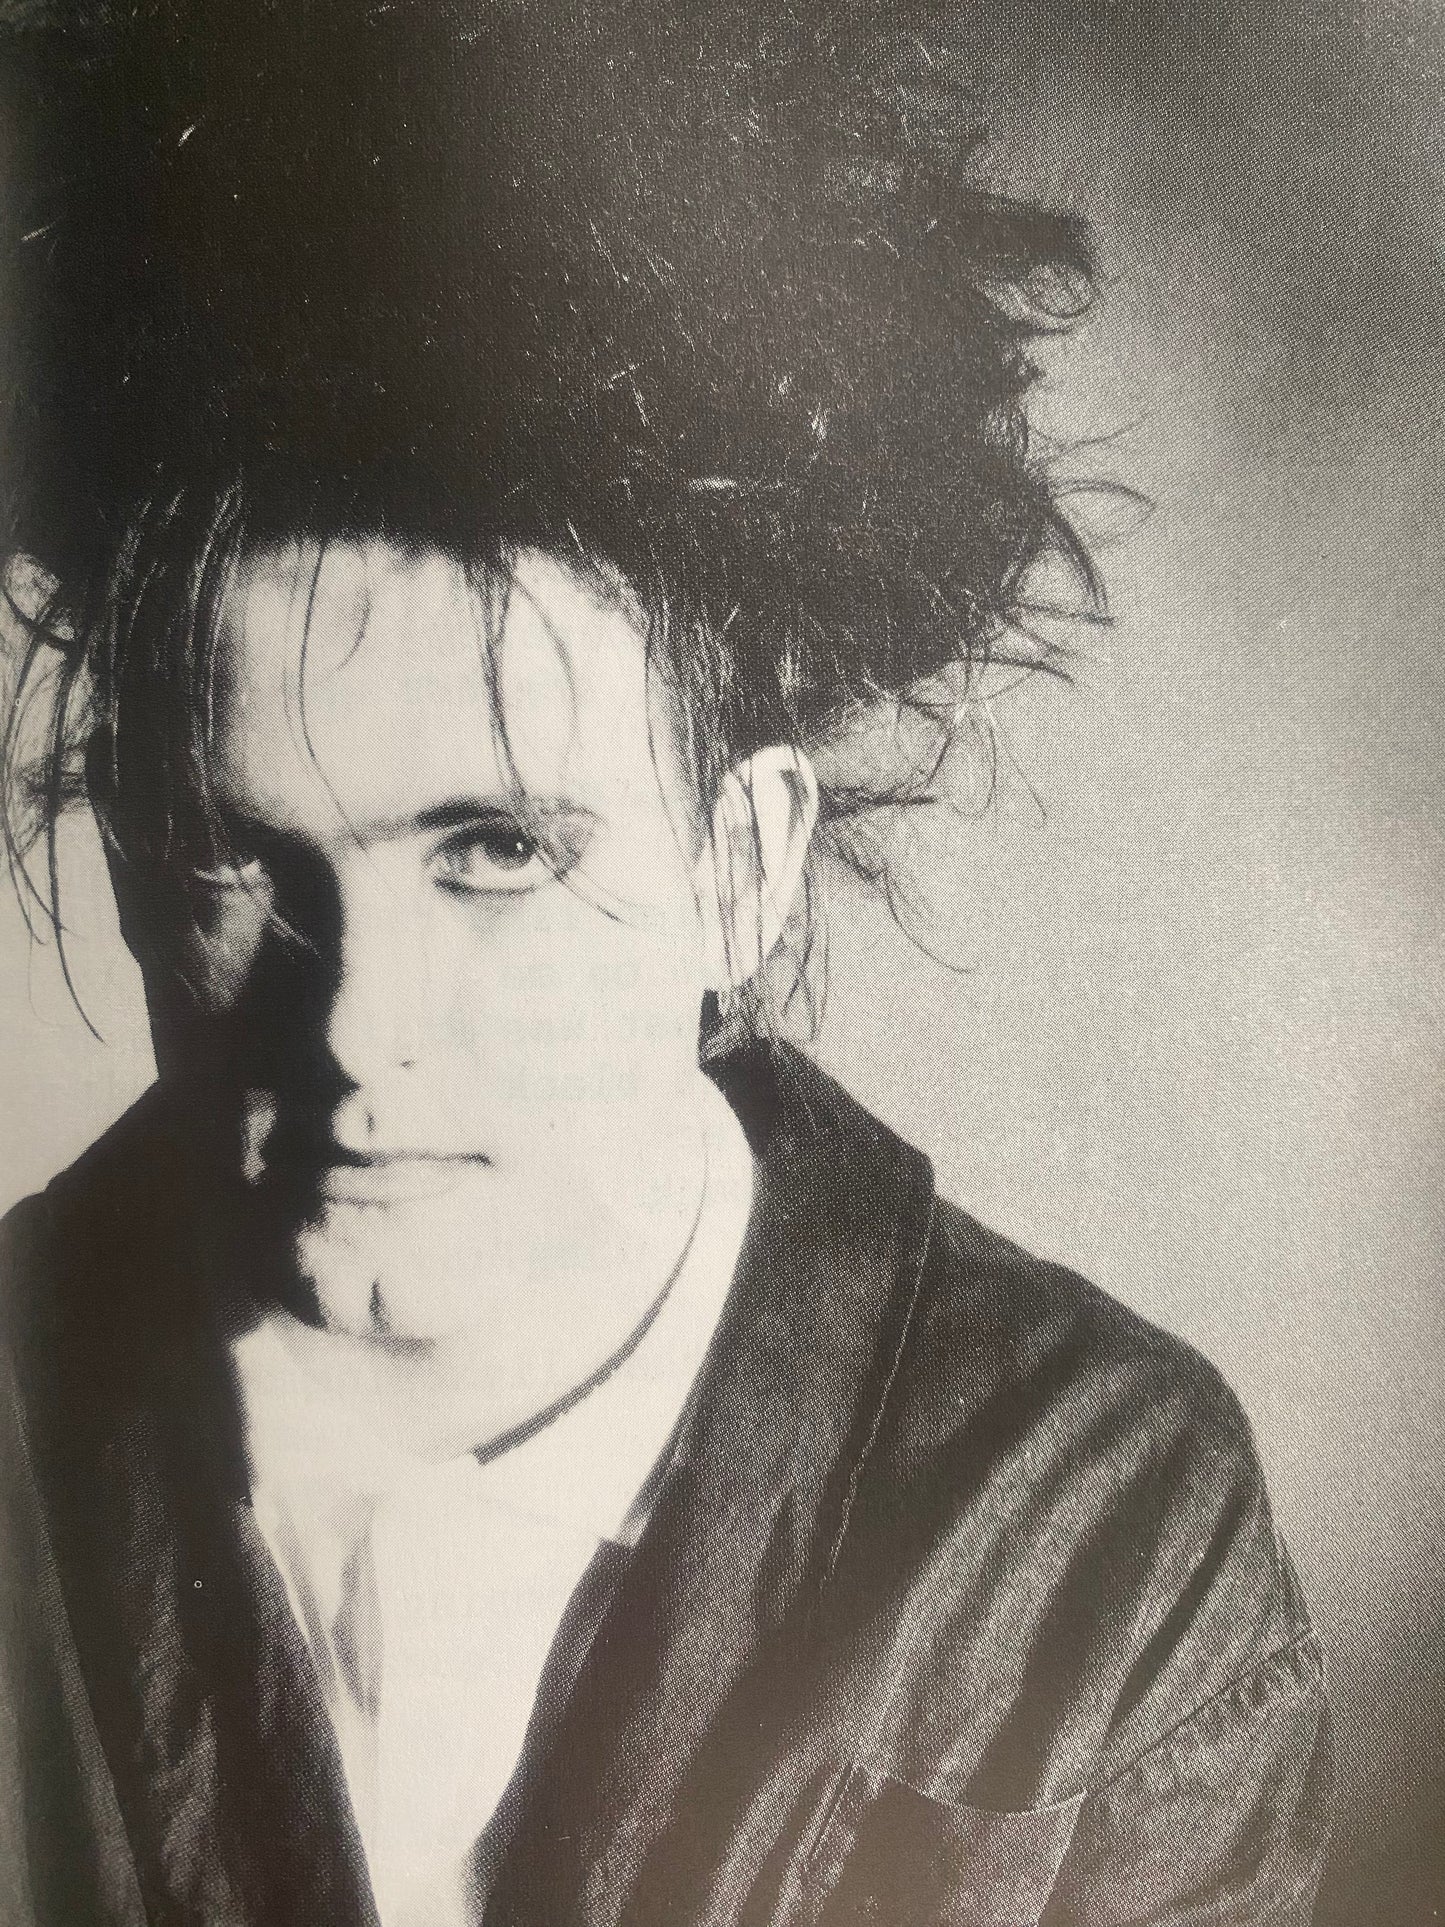 The Cure - Songwords 1978-1989 (1989)